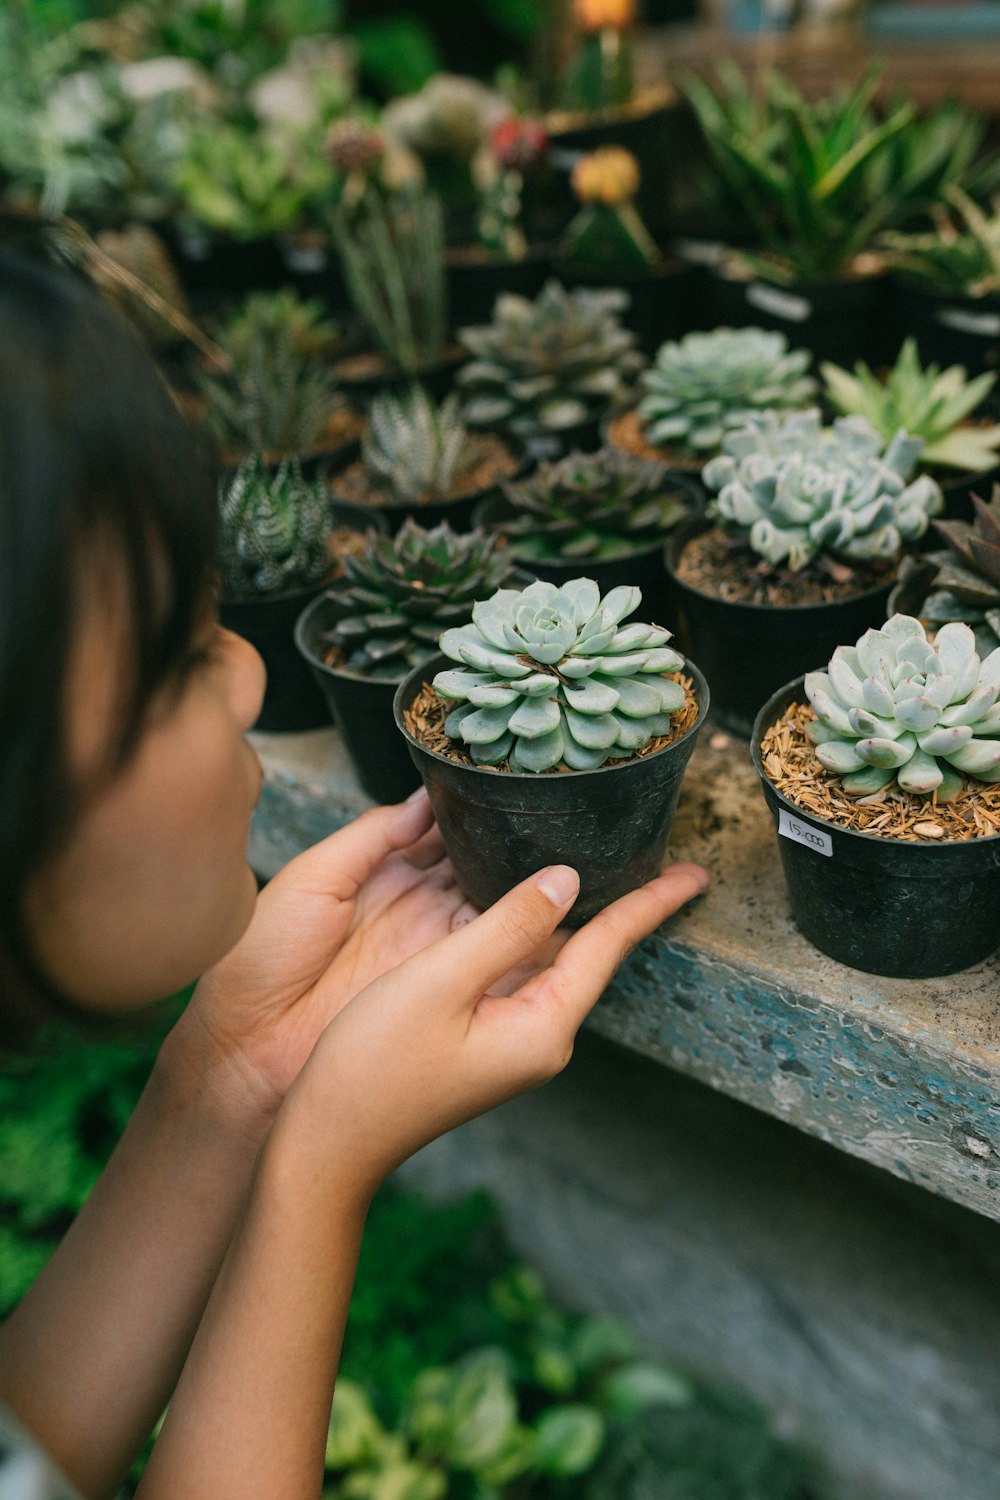 a hand touching a cactus